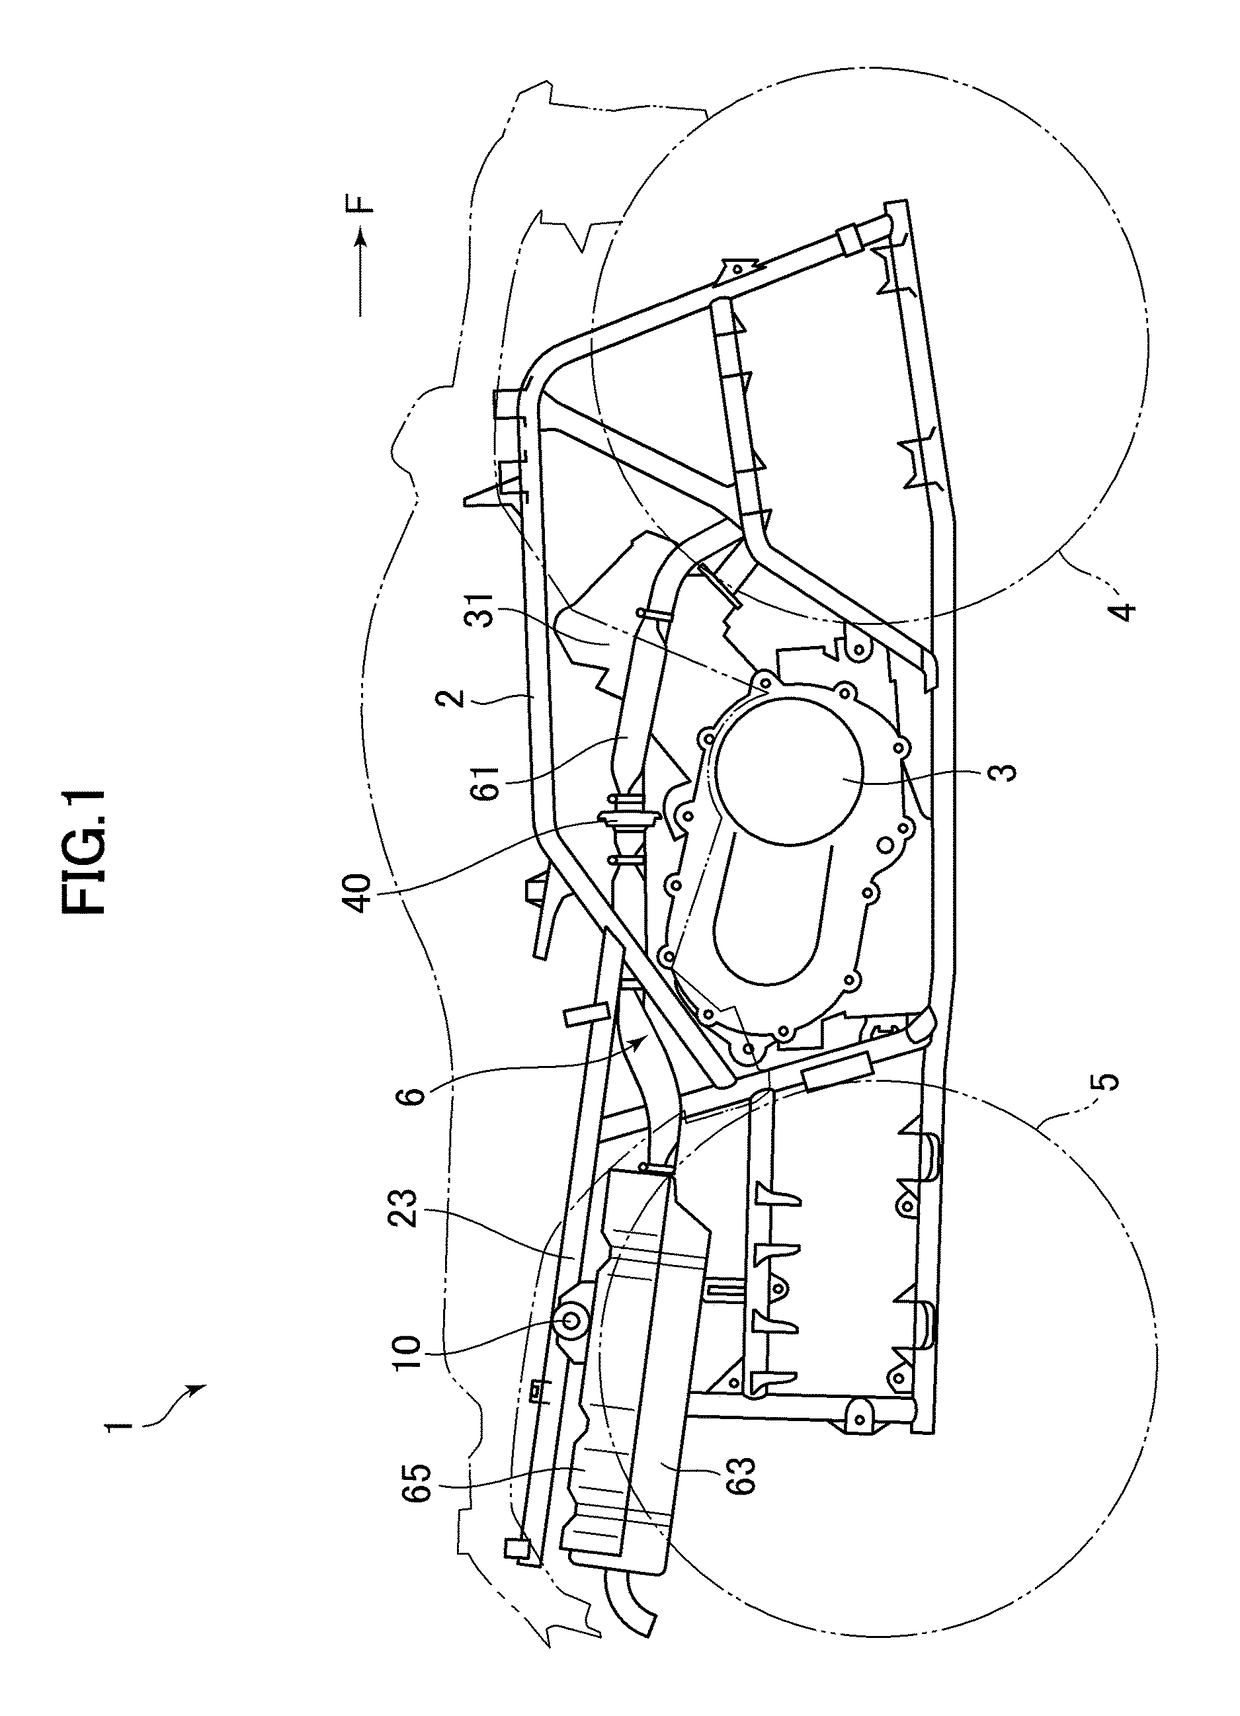 Mount device and vehicle